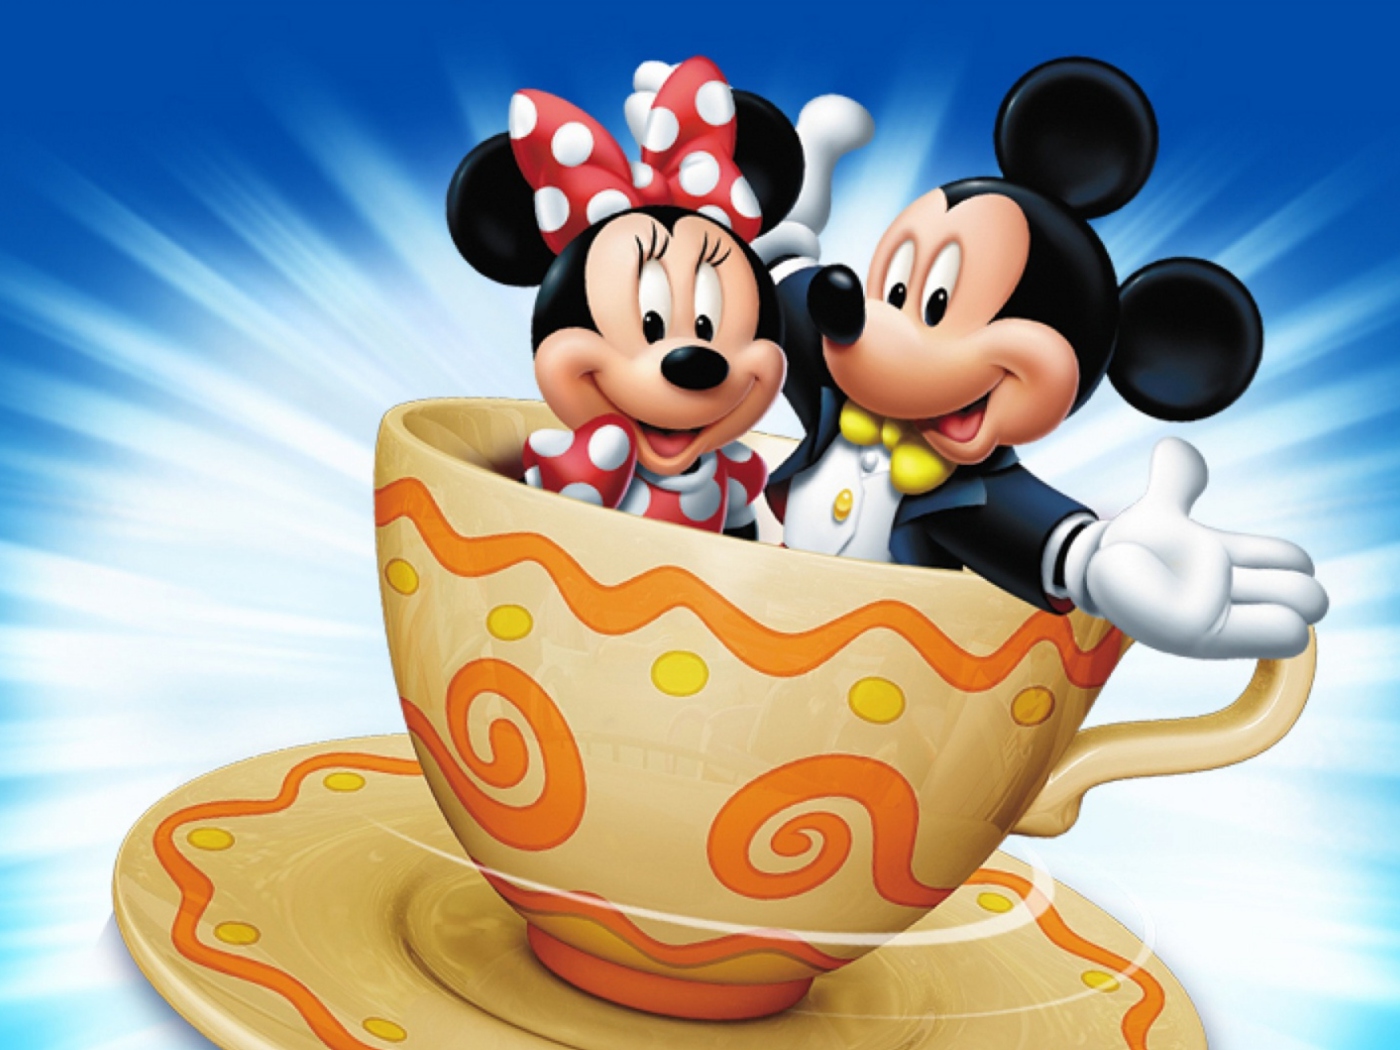 Mickey And Minnie Mouse In Cup wallpaper 1400x1050